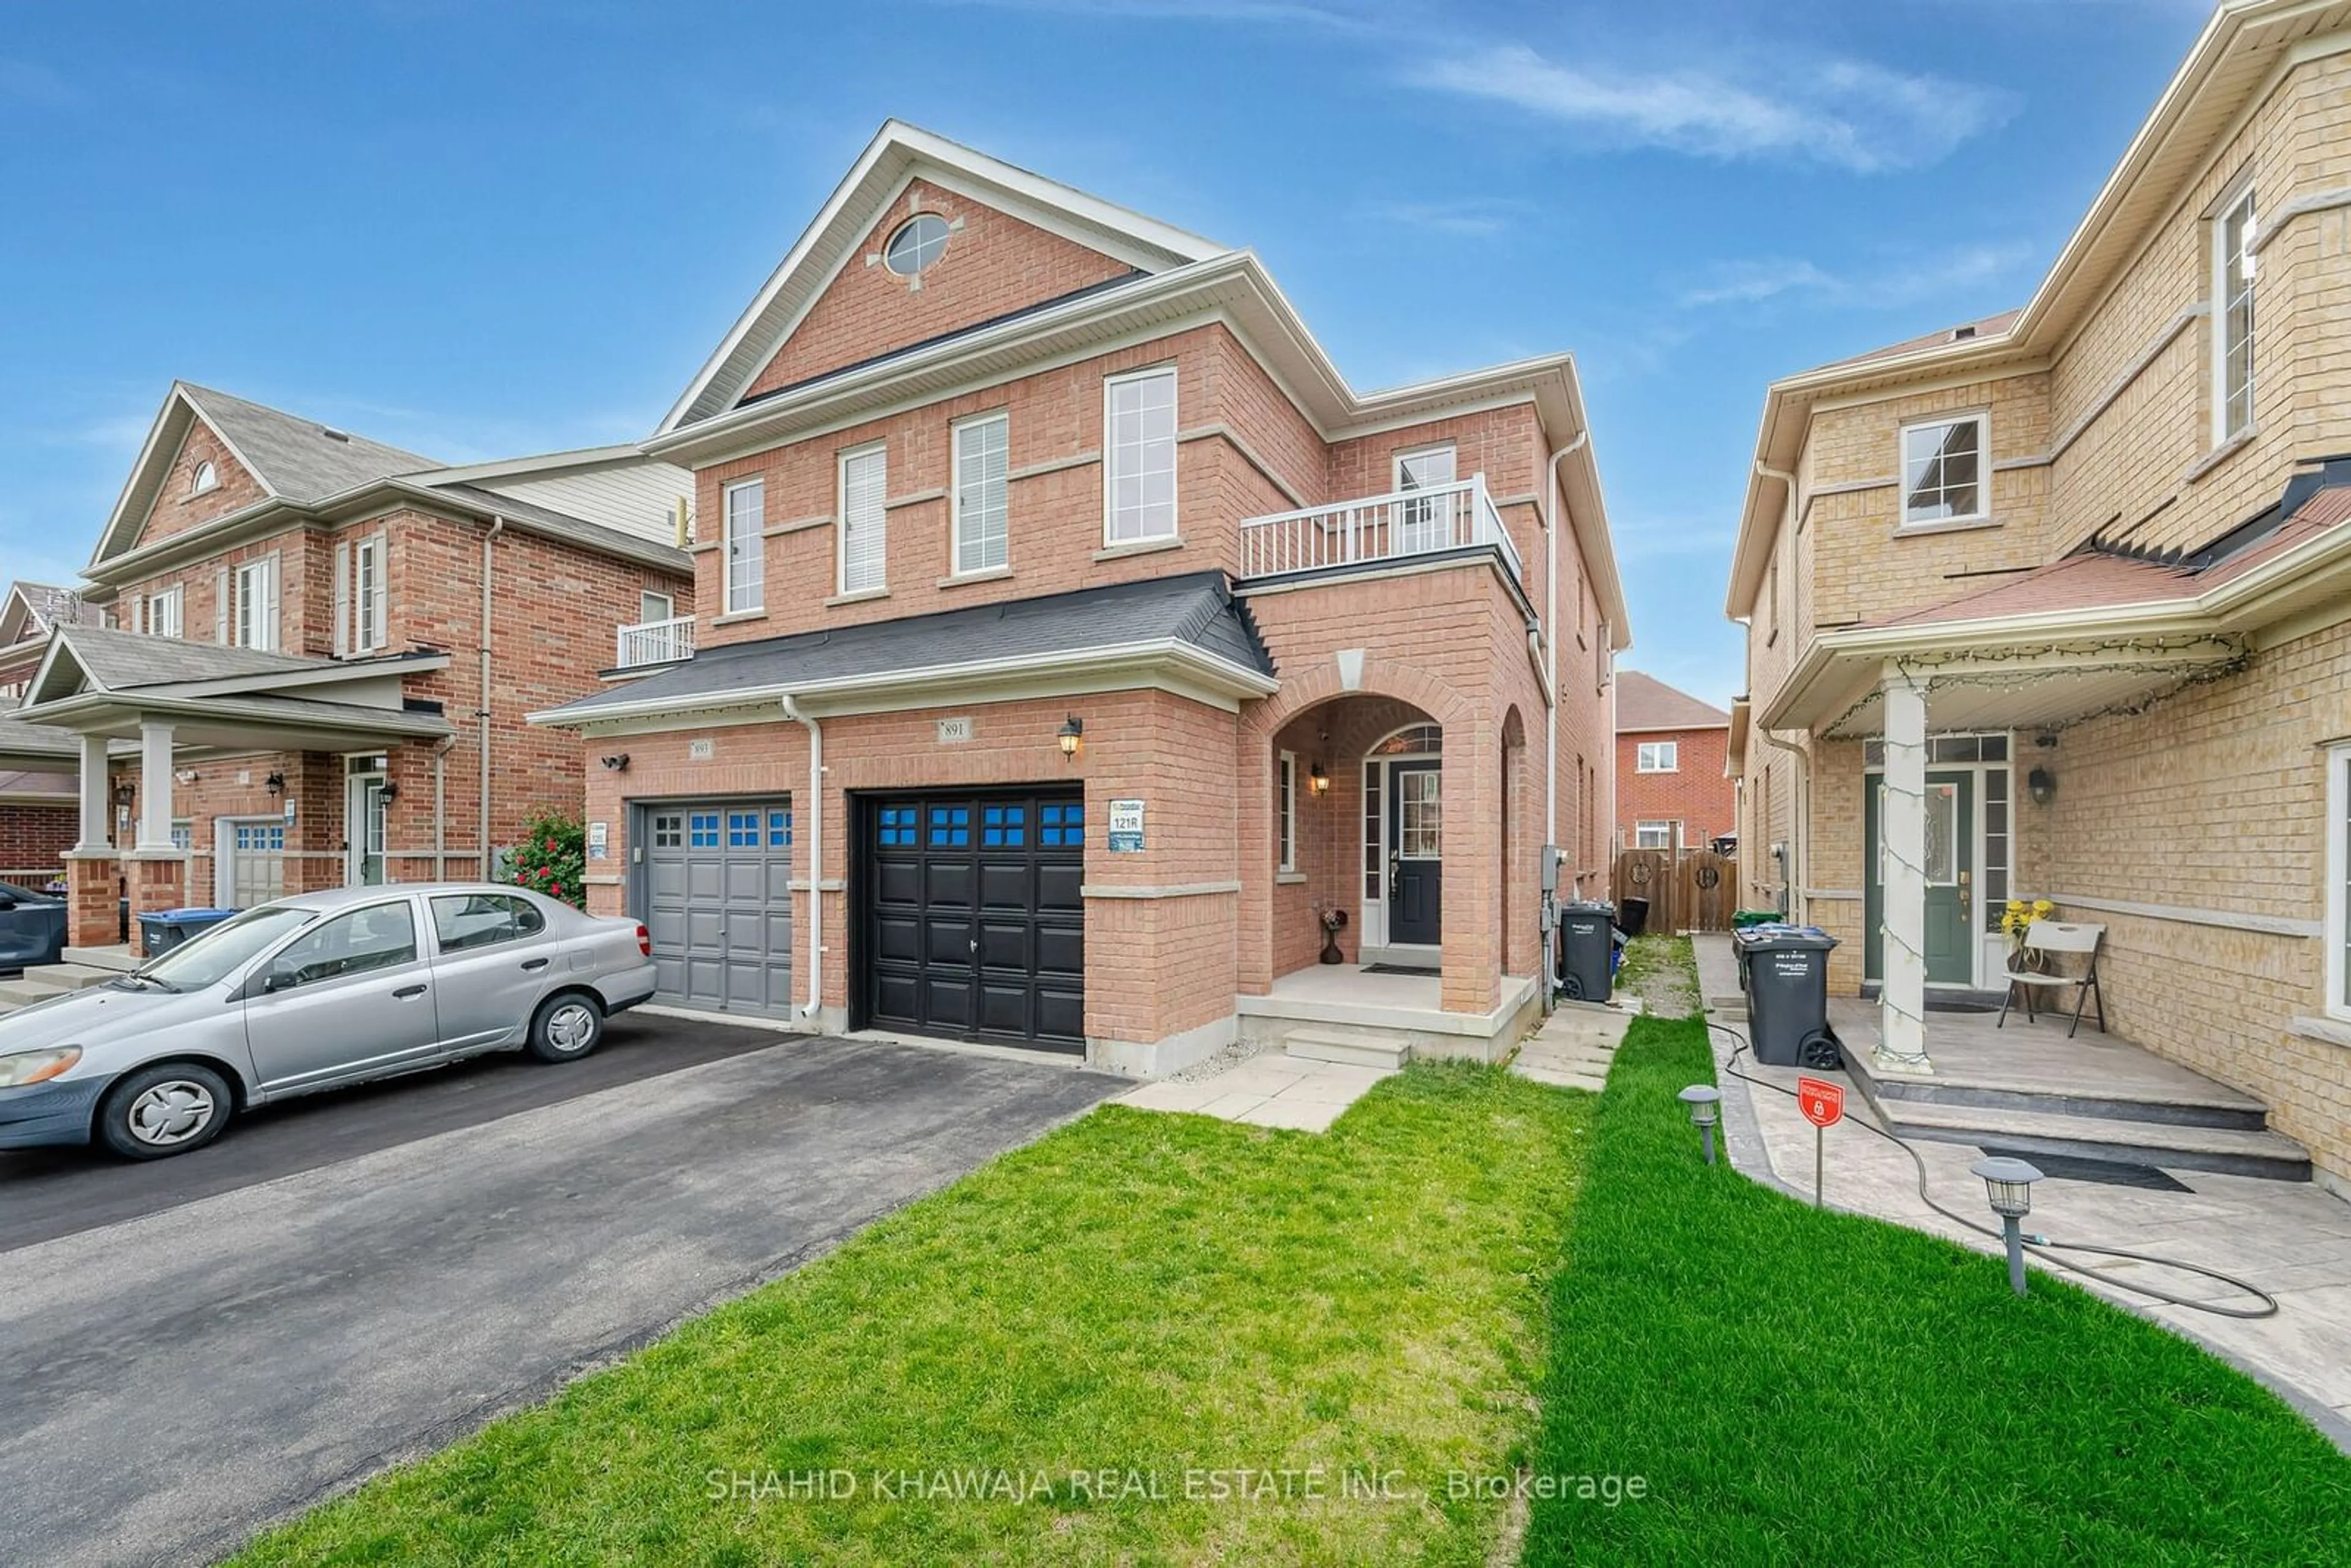 Home with brick exterior material for 891 Oasis Dr, Mississauga Ontario L5V 0C7